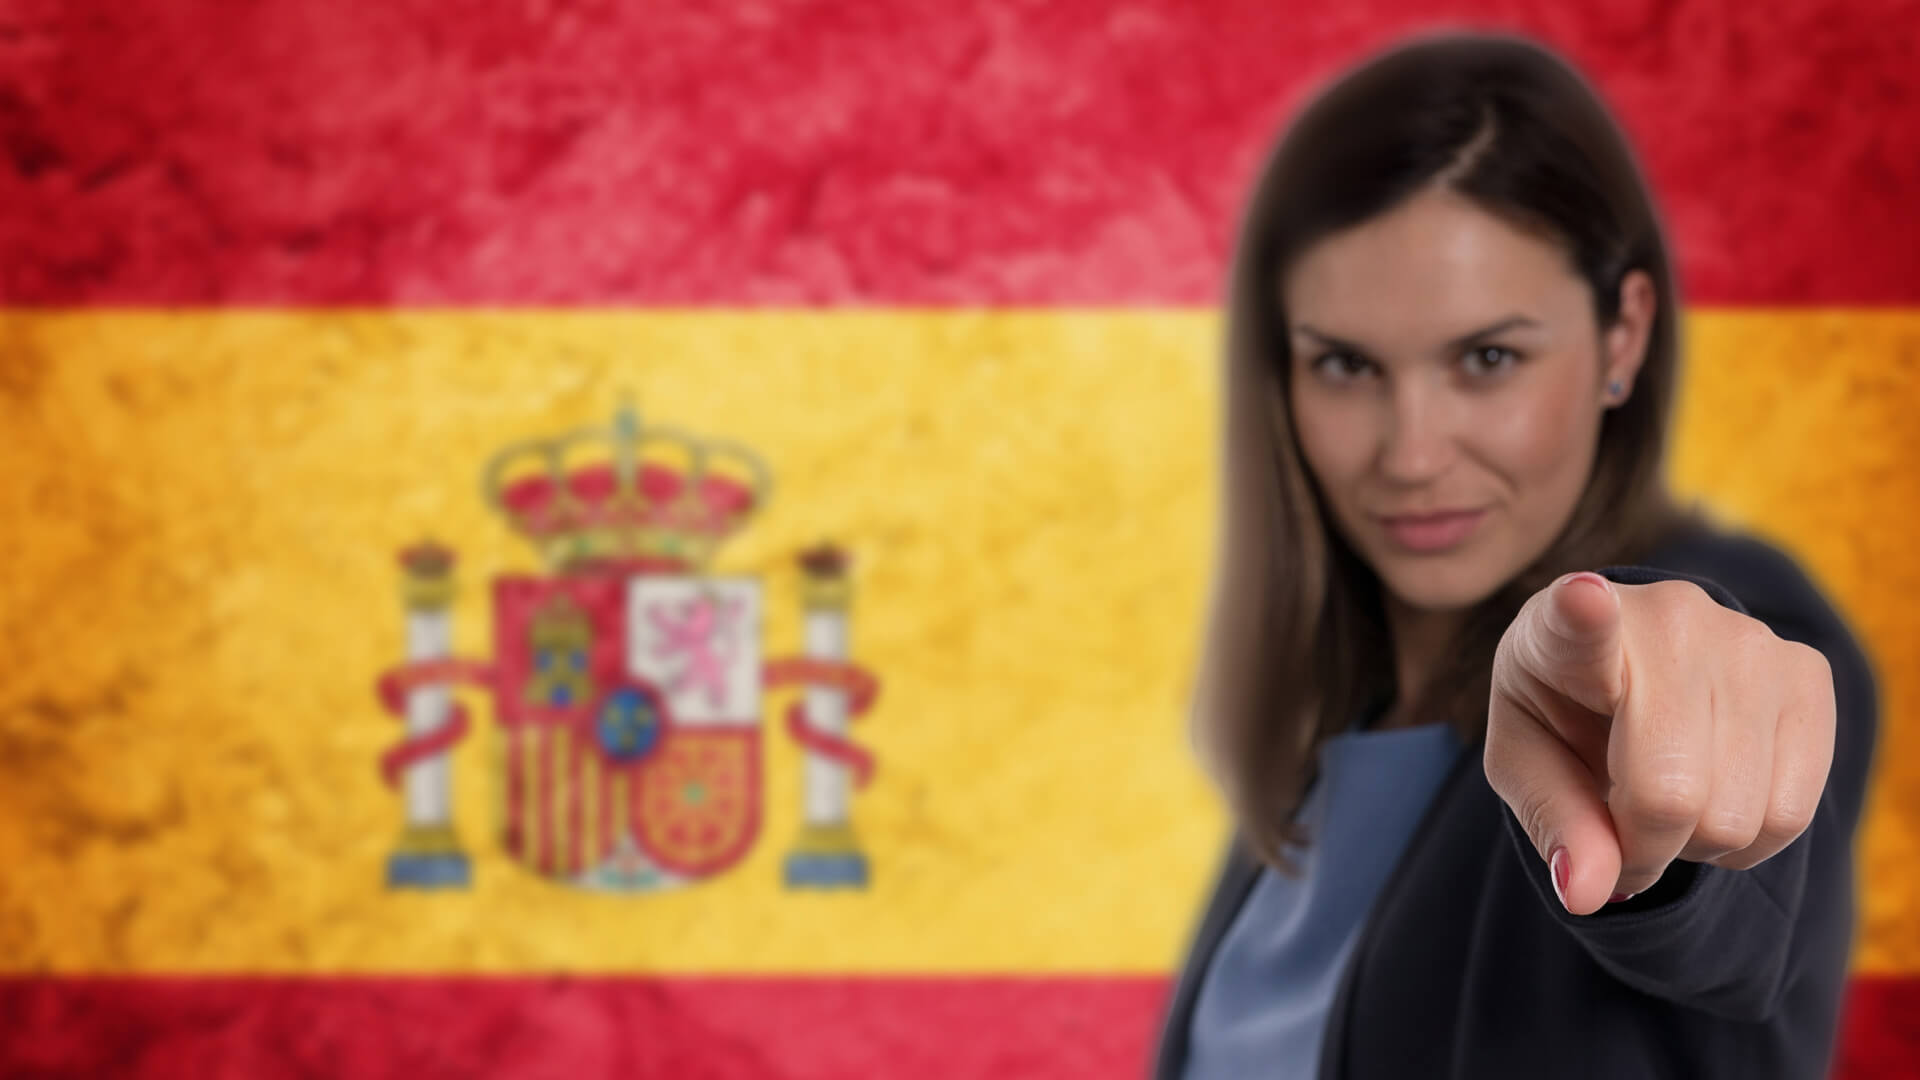 one of the ways of acquiring Spanish nationality is by letter of naturalization.